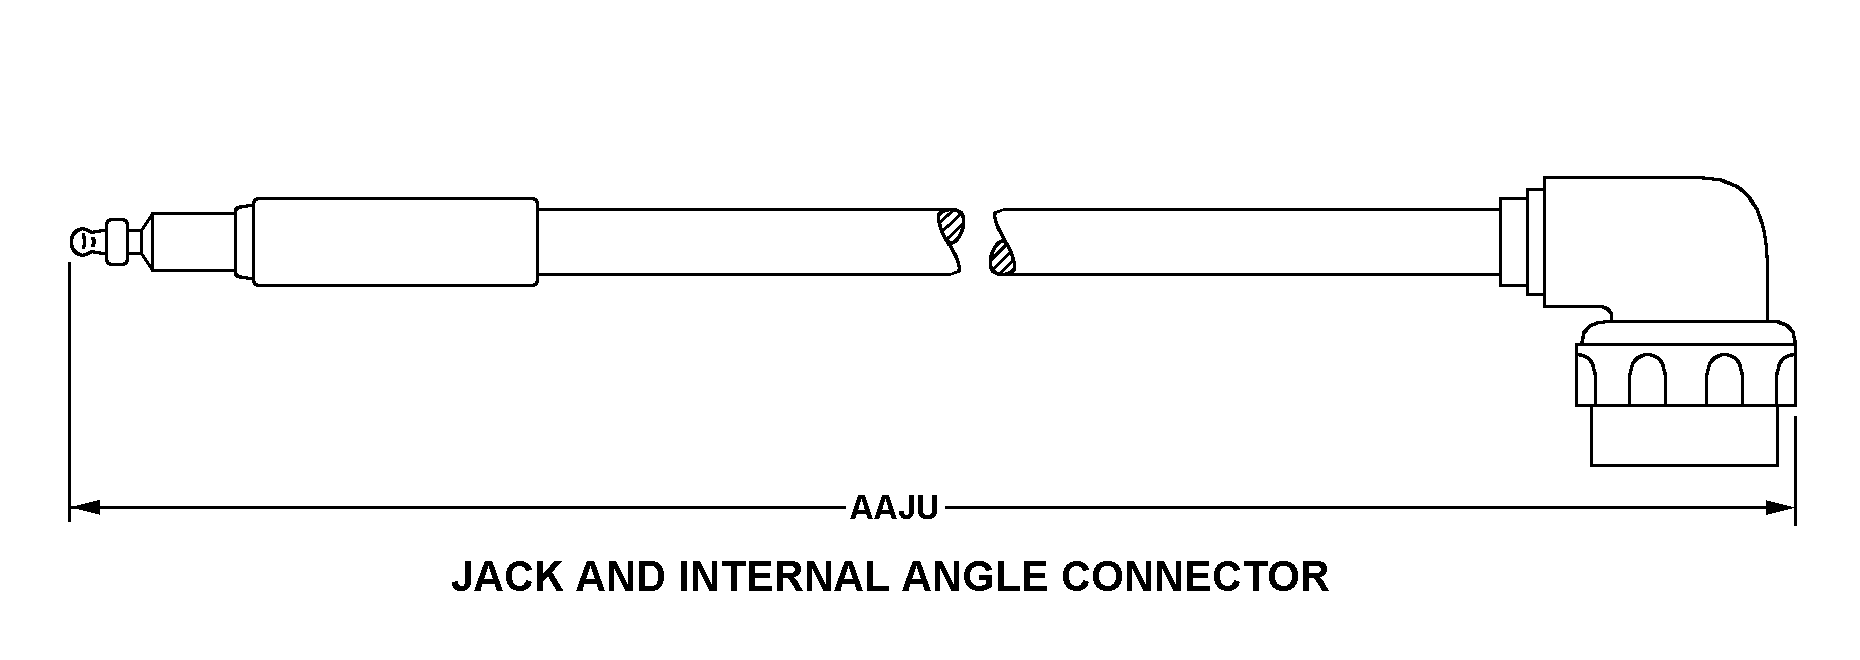 JACK AND INTERNAL ANGLE CONNECTOR style nsn 5995-01-327-6238